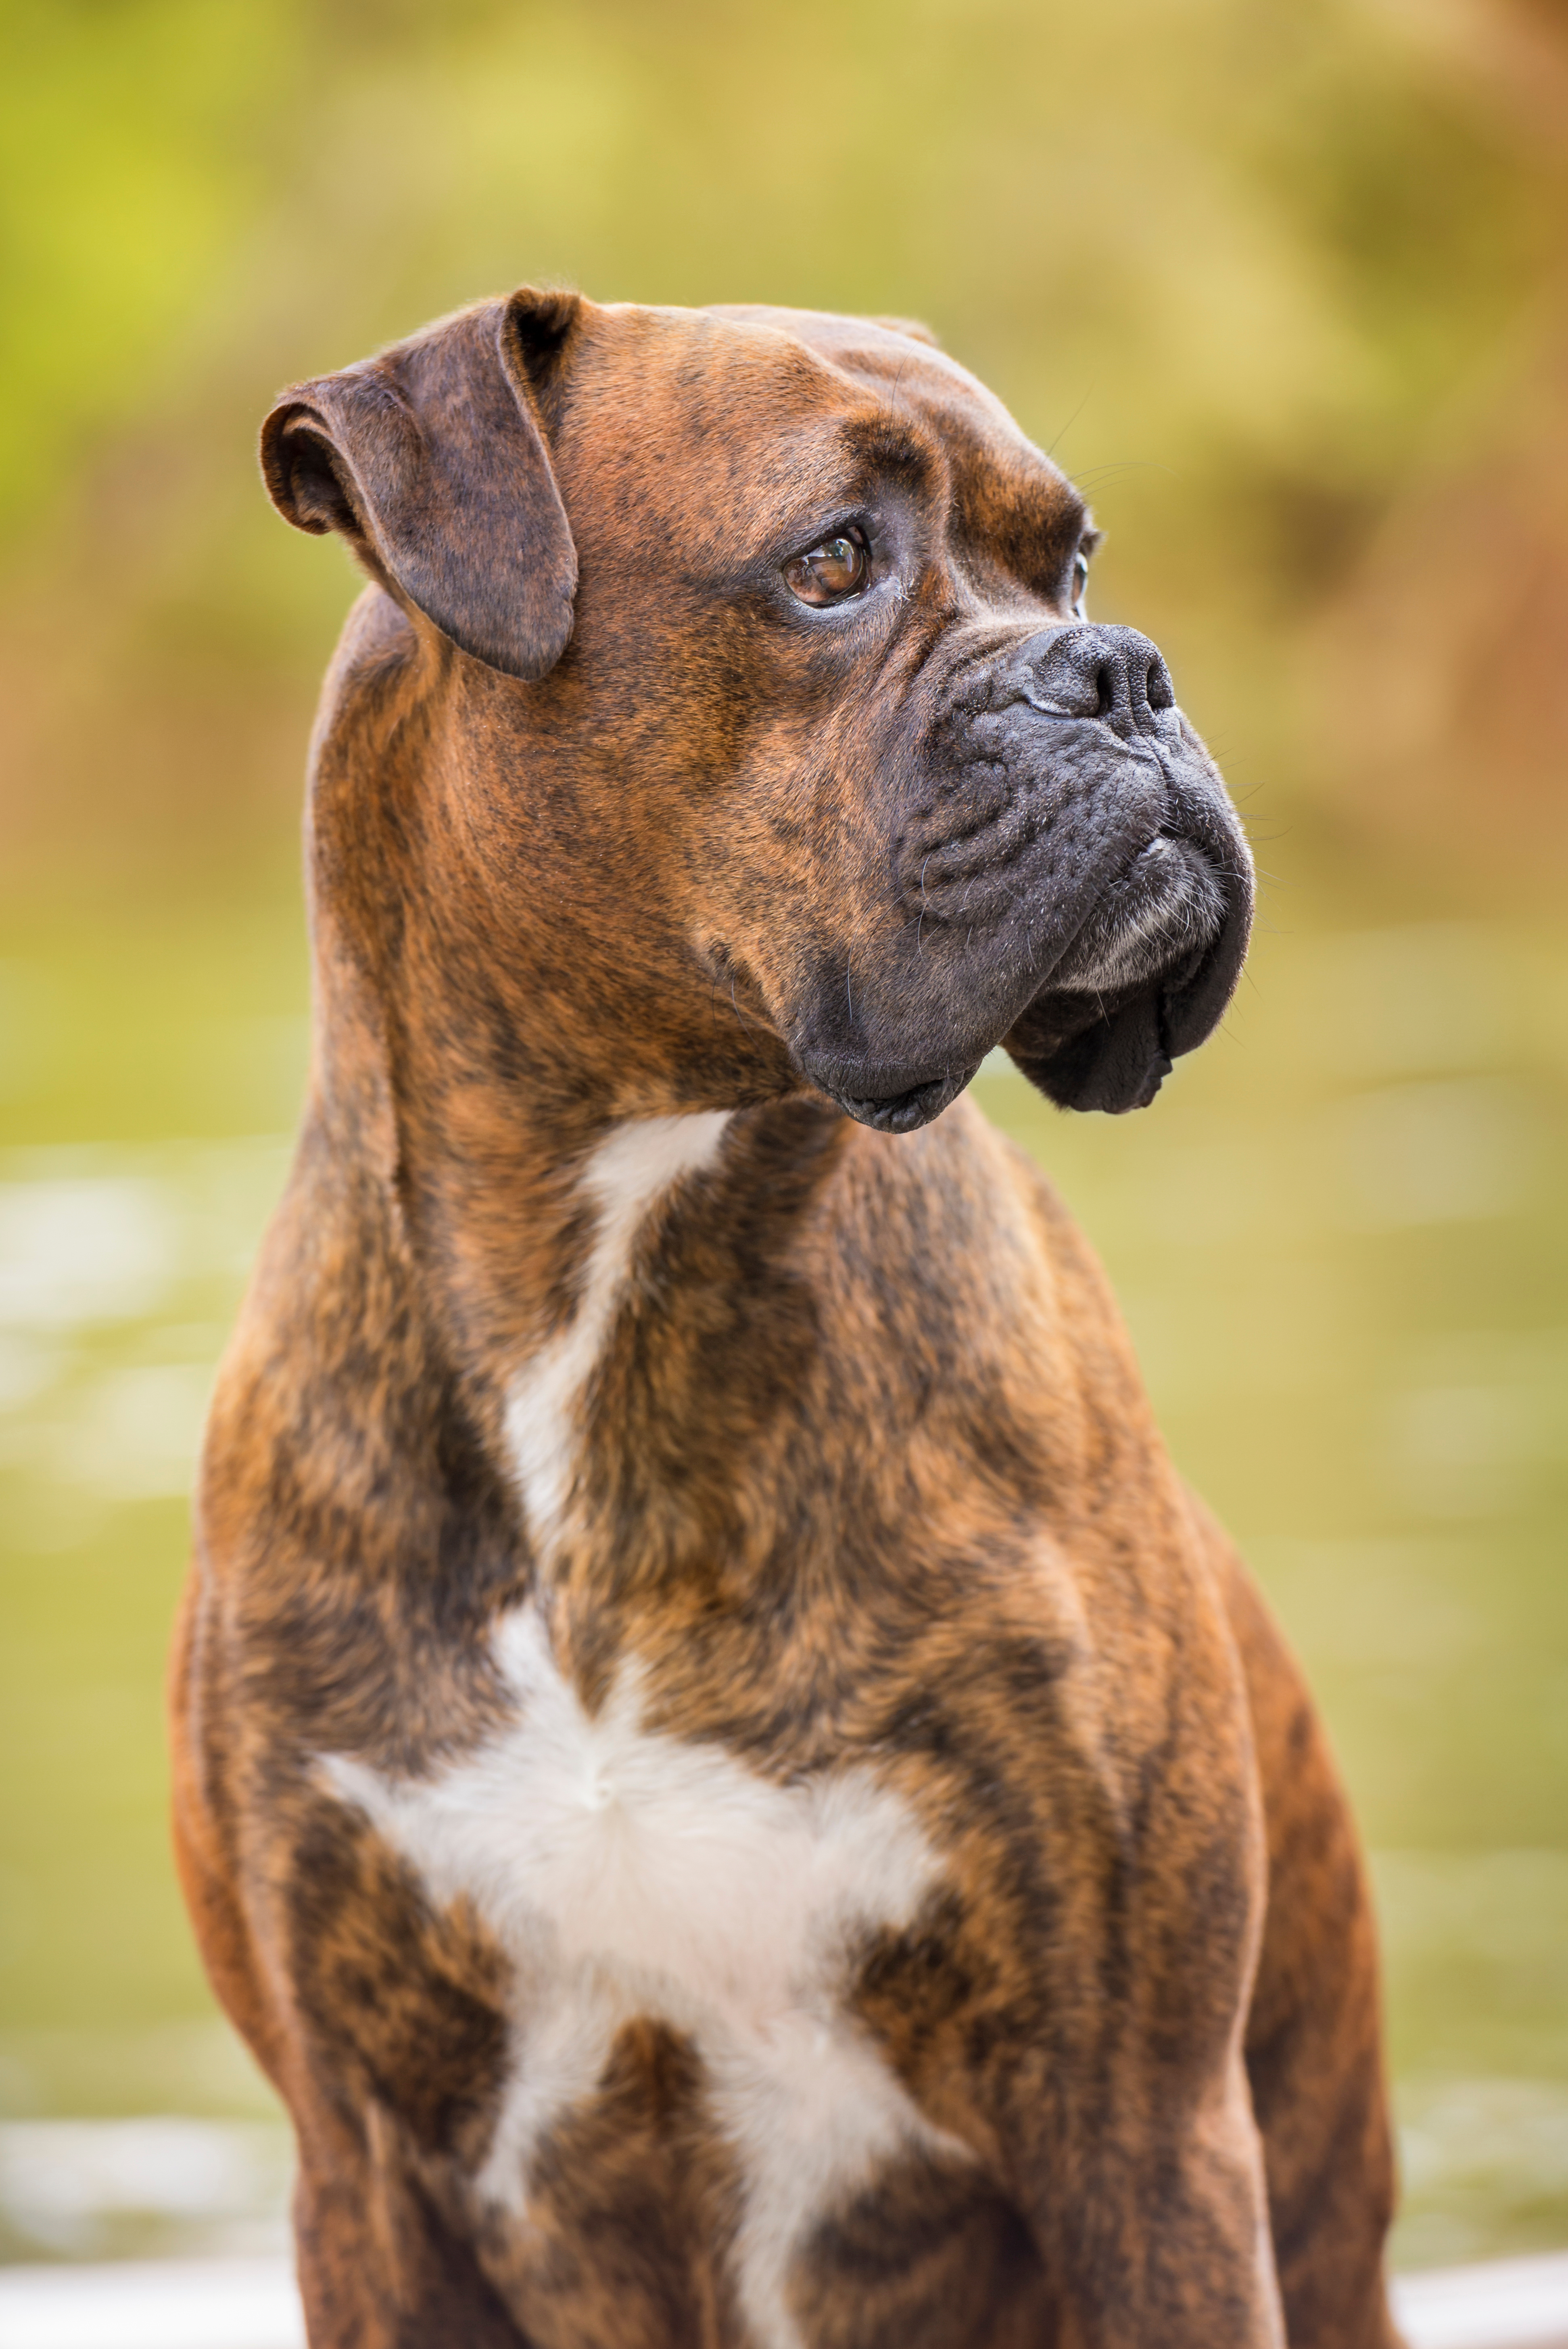 A trained boxer dog - Dog Training Elite Central Mass is the best choice for boxer dog training in Worcester, MA!